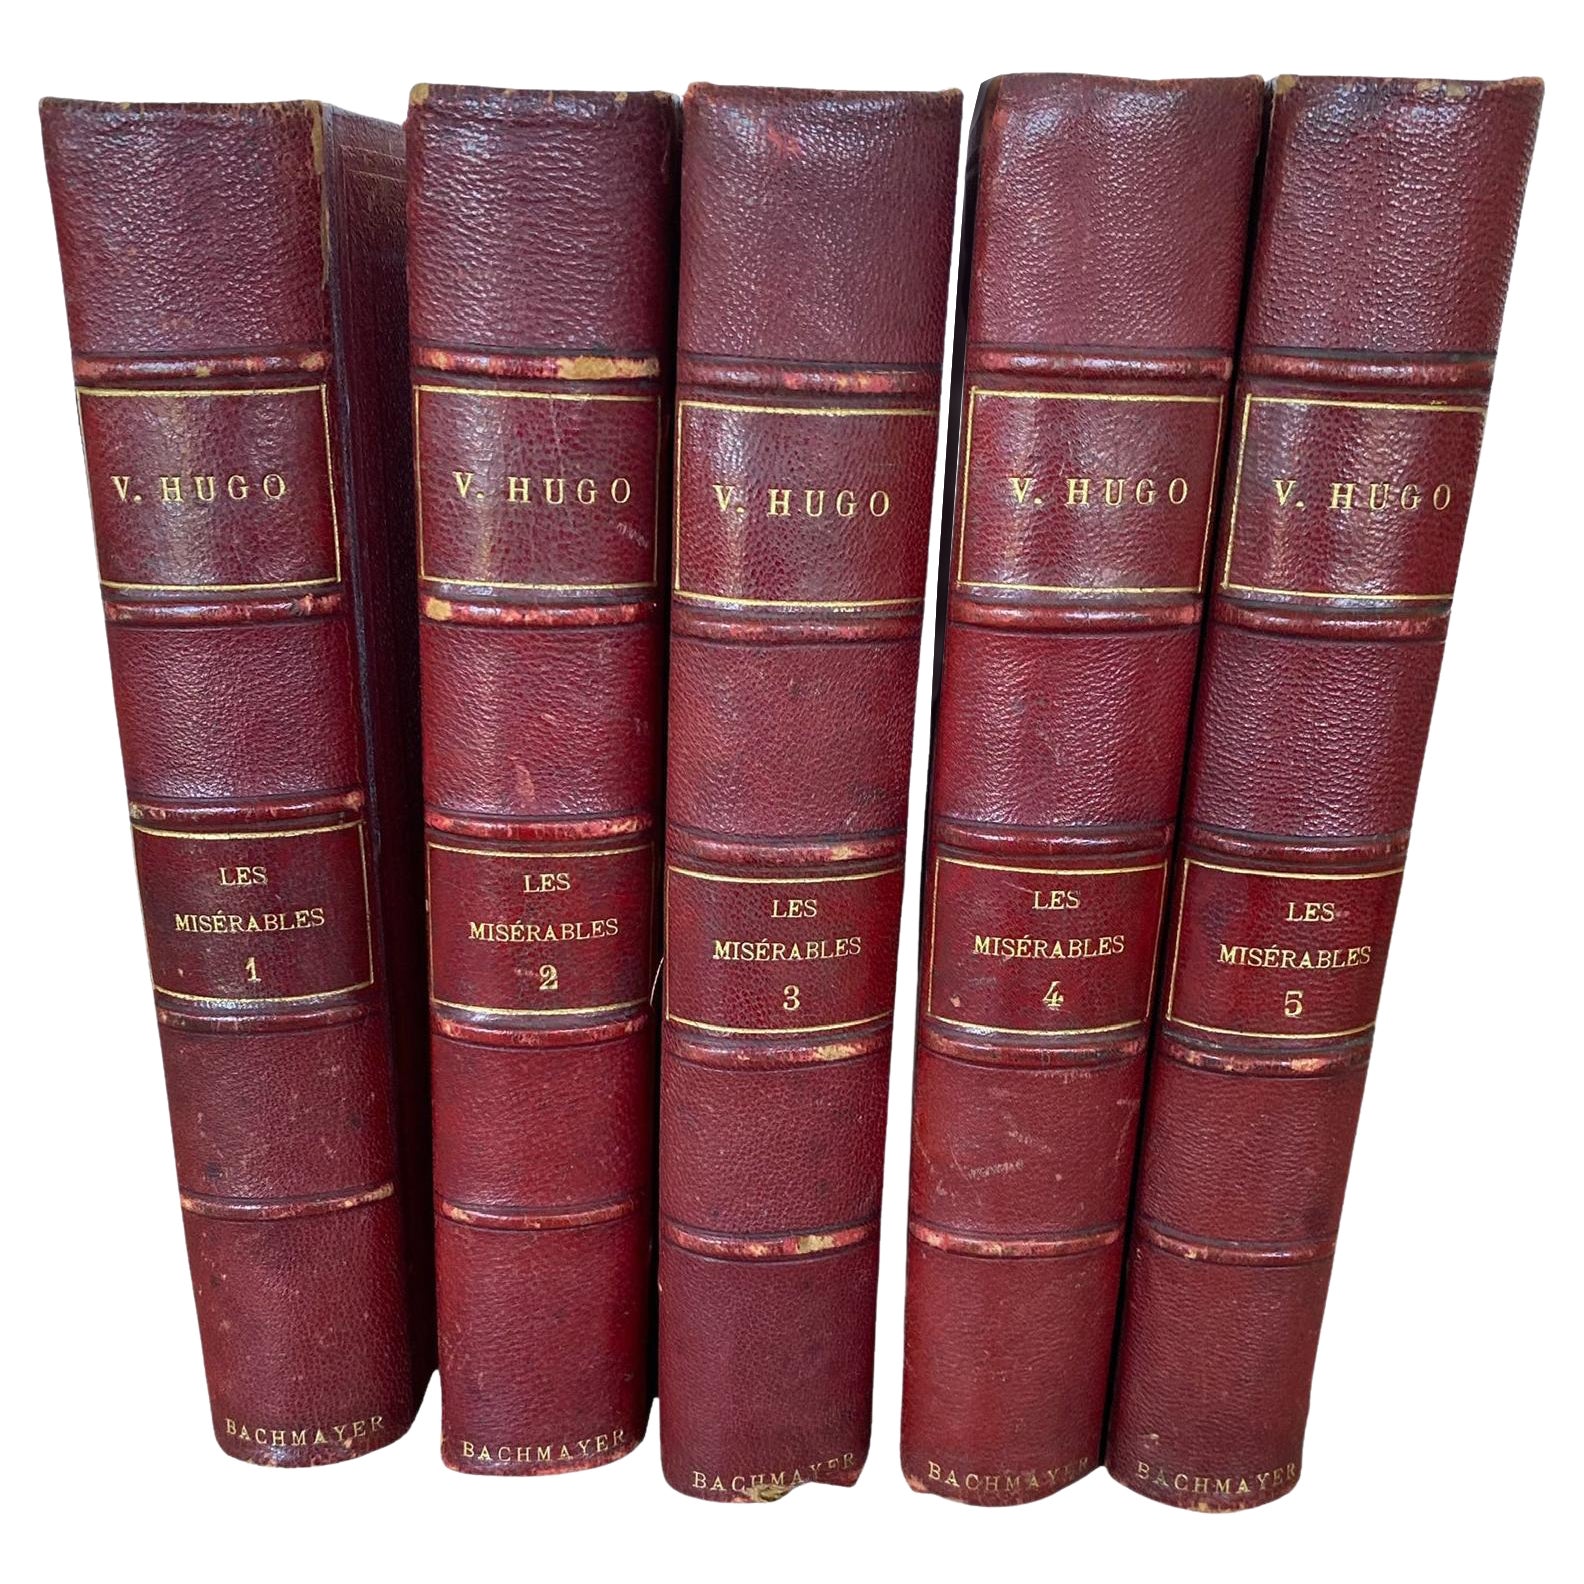 Victor Hugo Les Misérables in French - Leather Bound Antique Title 5 volumes